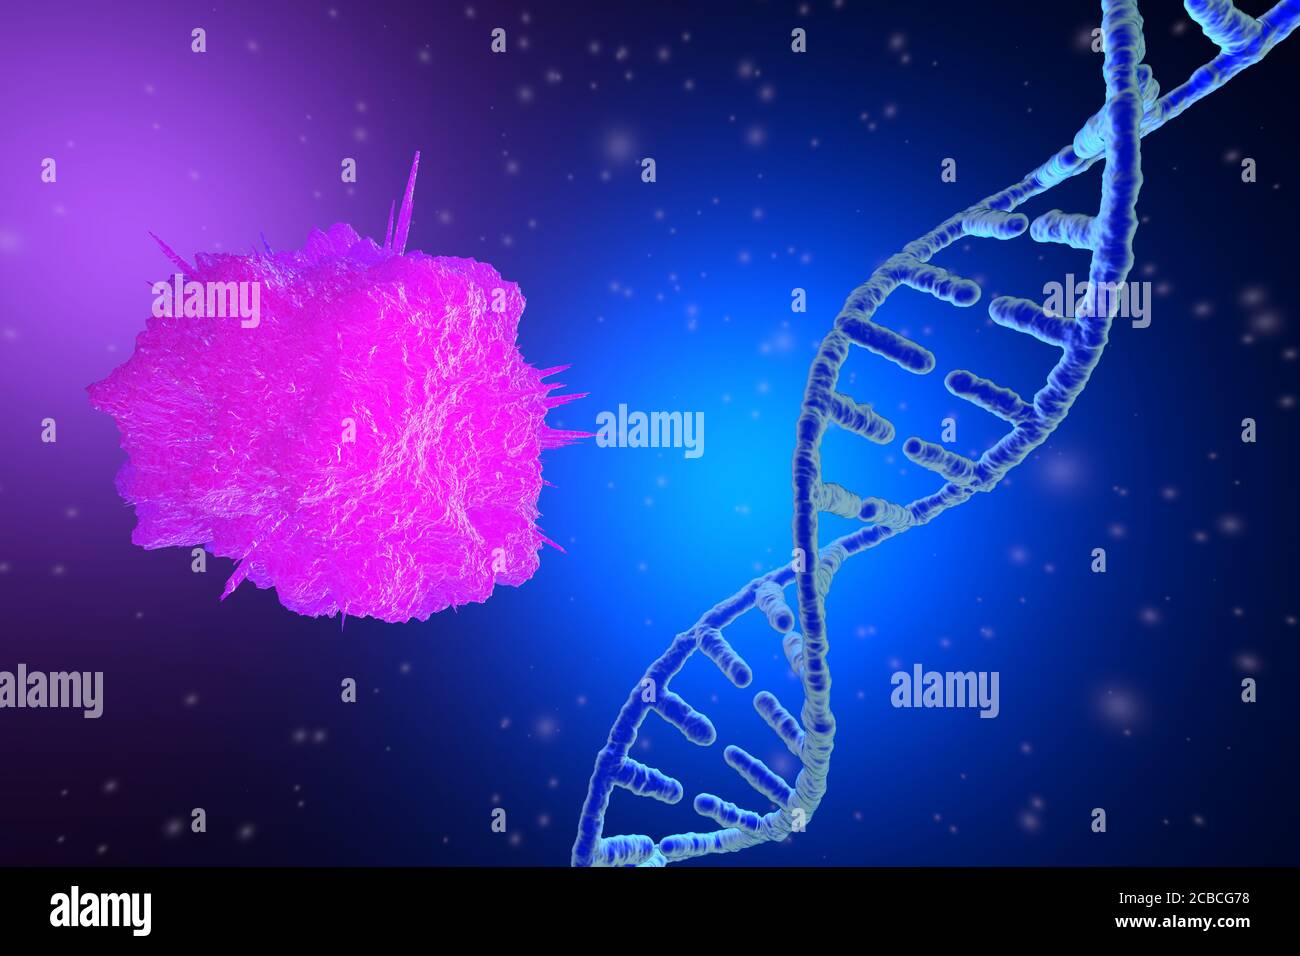 3D Illustration of a mutating stem cell with a DNA strand which defines its identity. Stock Photo